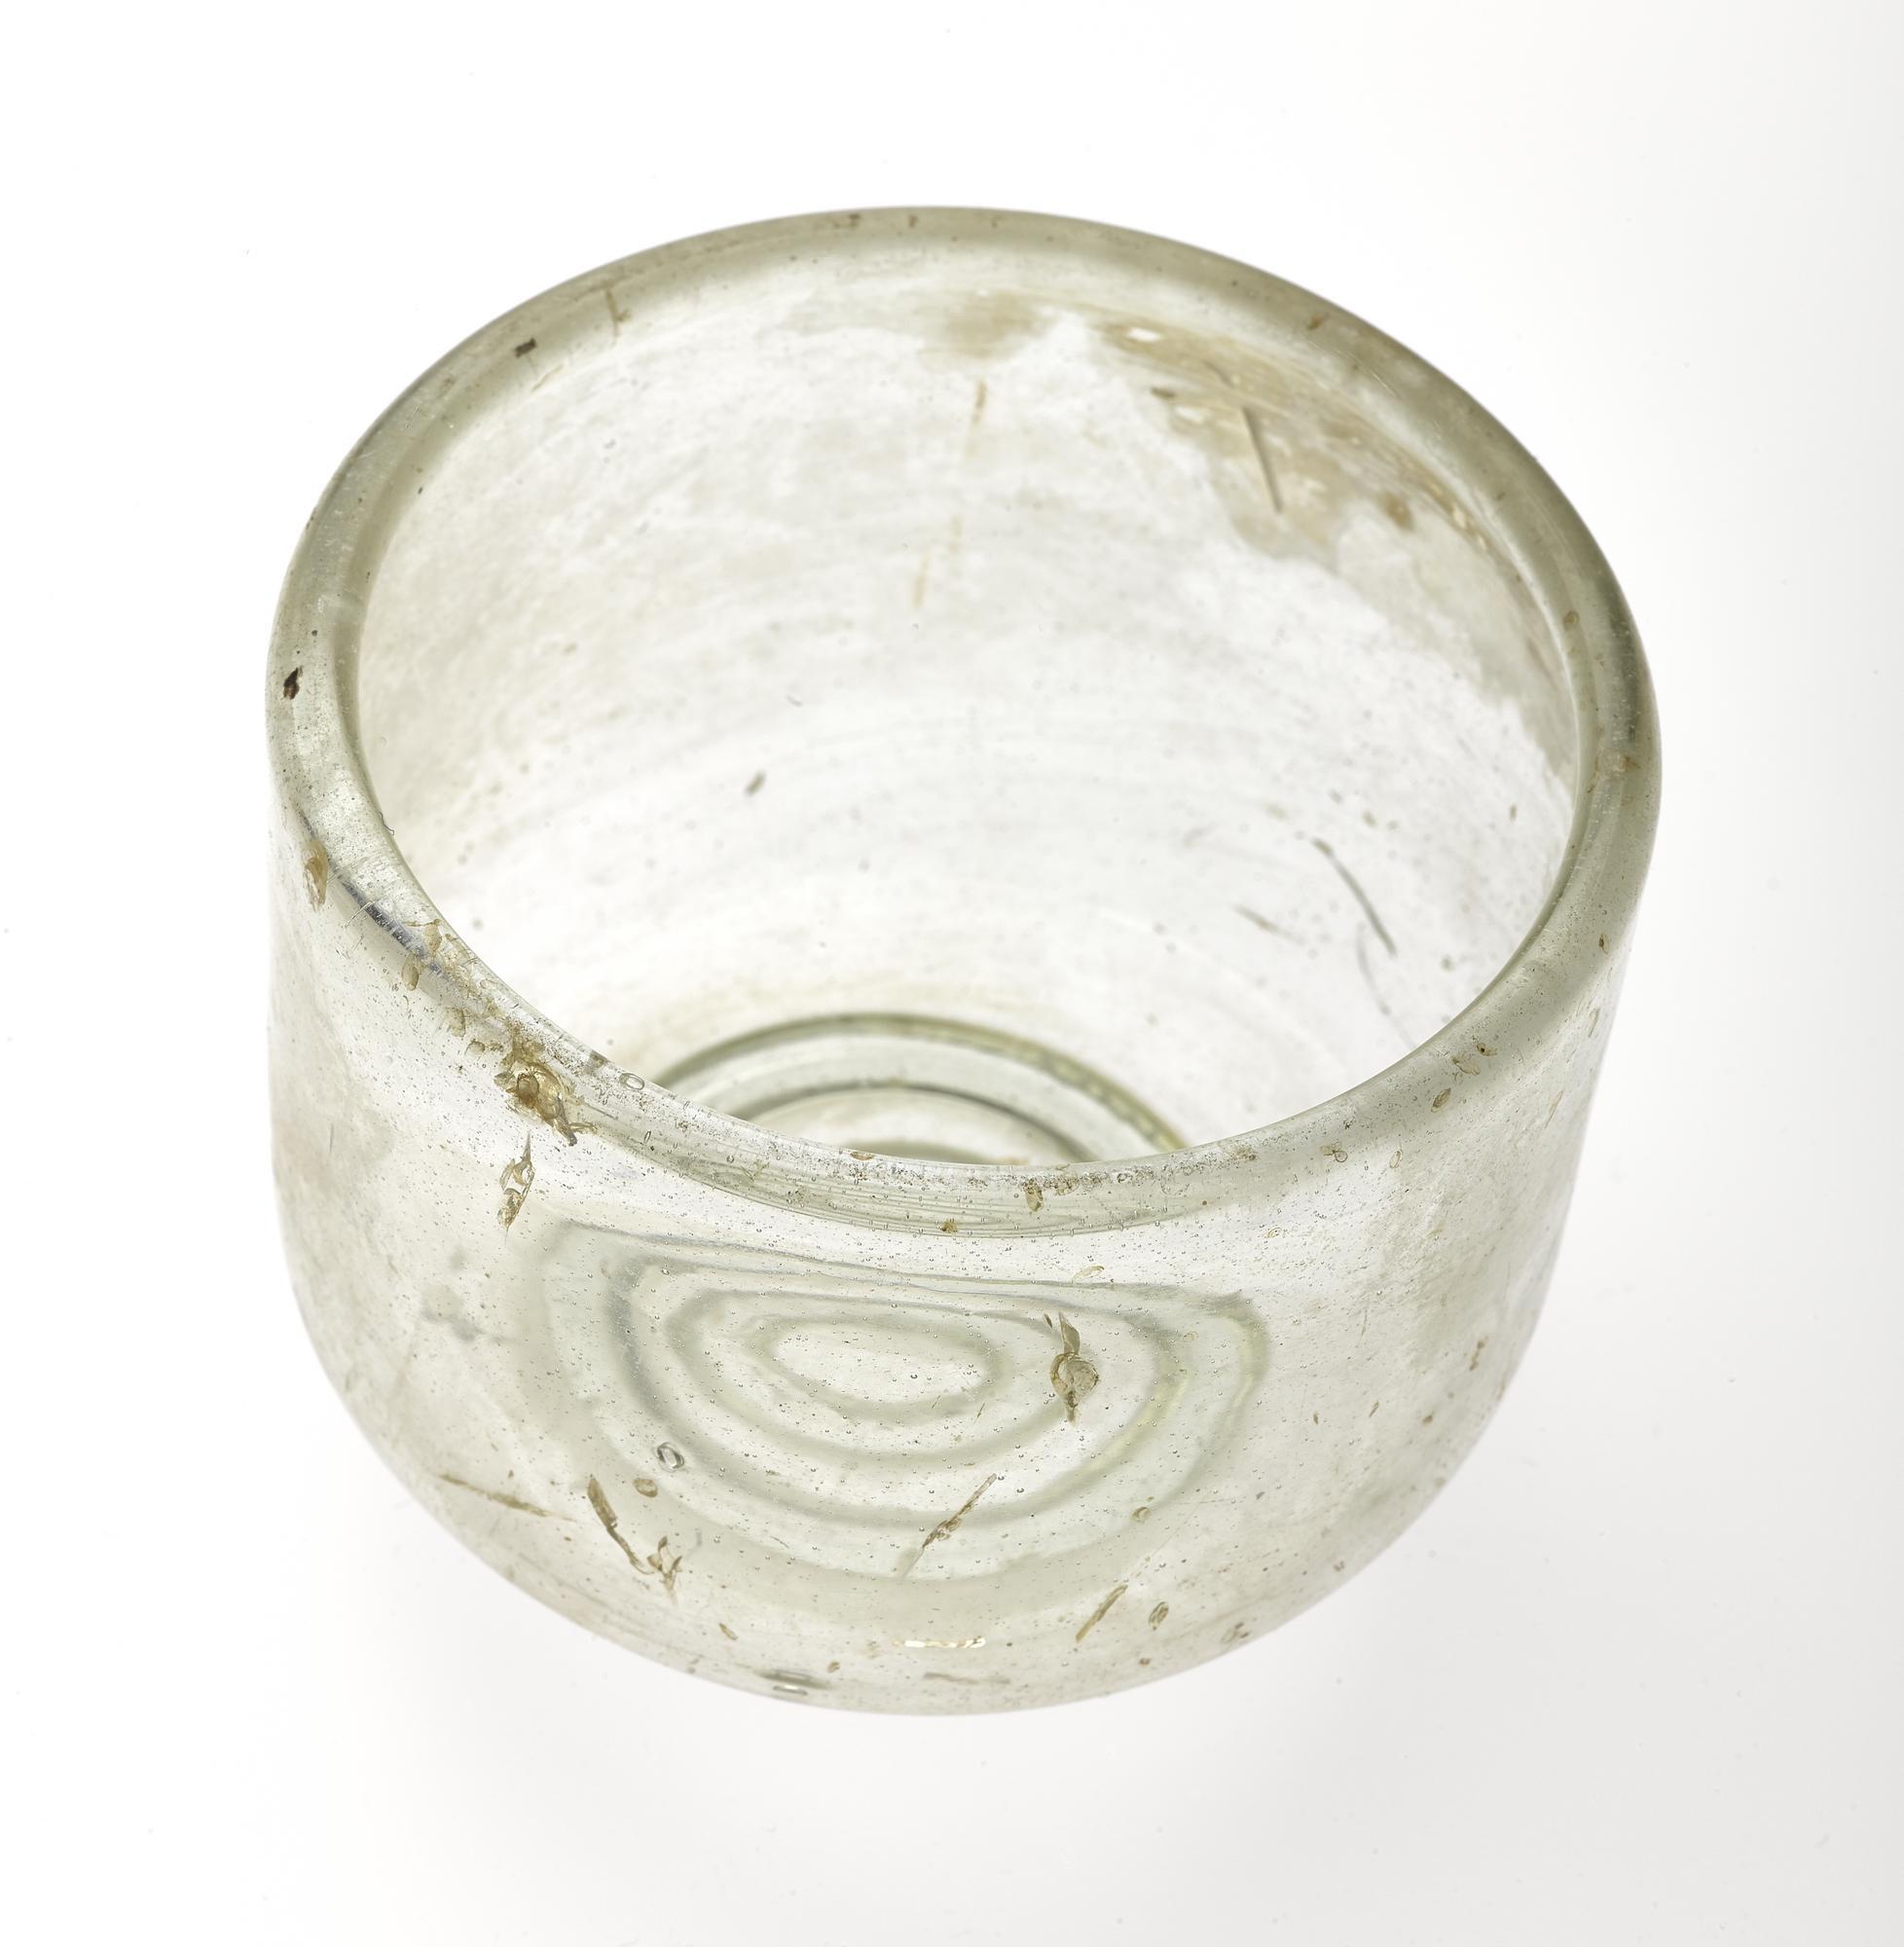 Image of Glass vessel, possibly a drinking bowl, from a burial at Airlie, Angus, 150 - 250 AD © National Museums Scotland